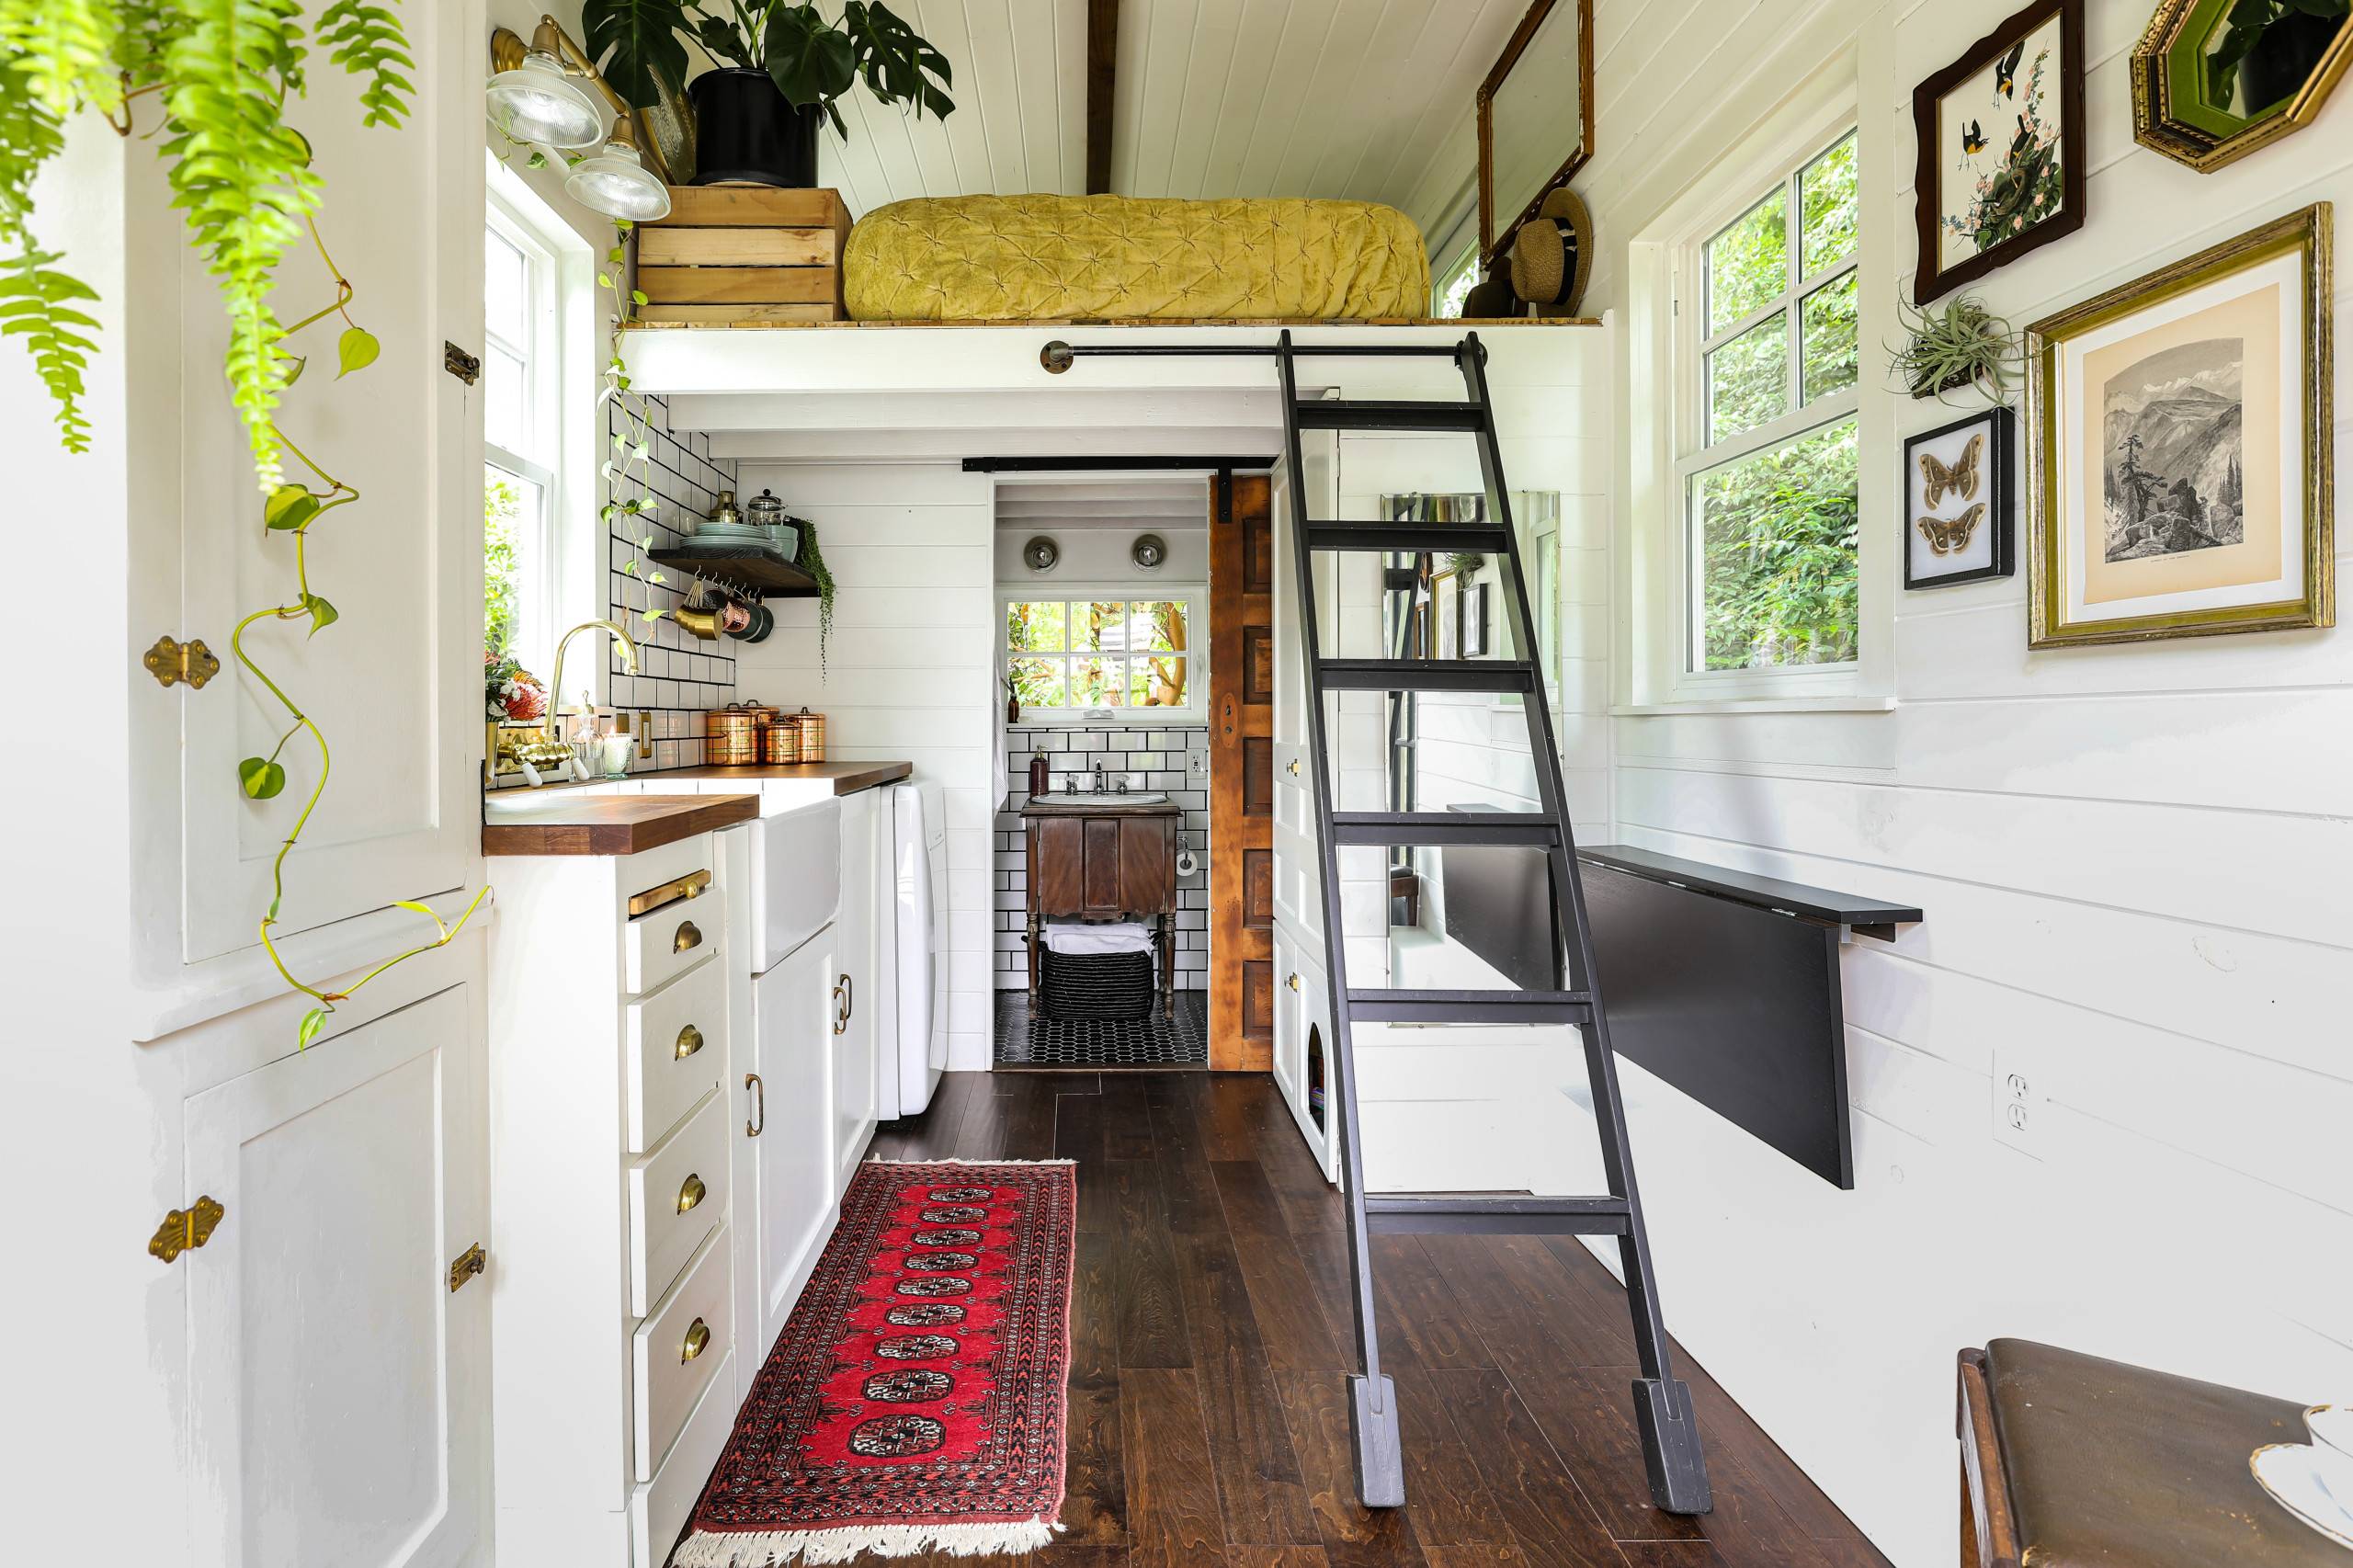 Rustic farmhouse style in a small space (from Houzz)